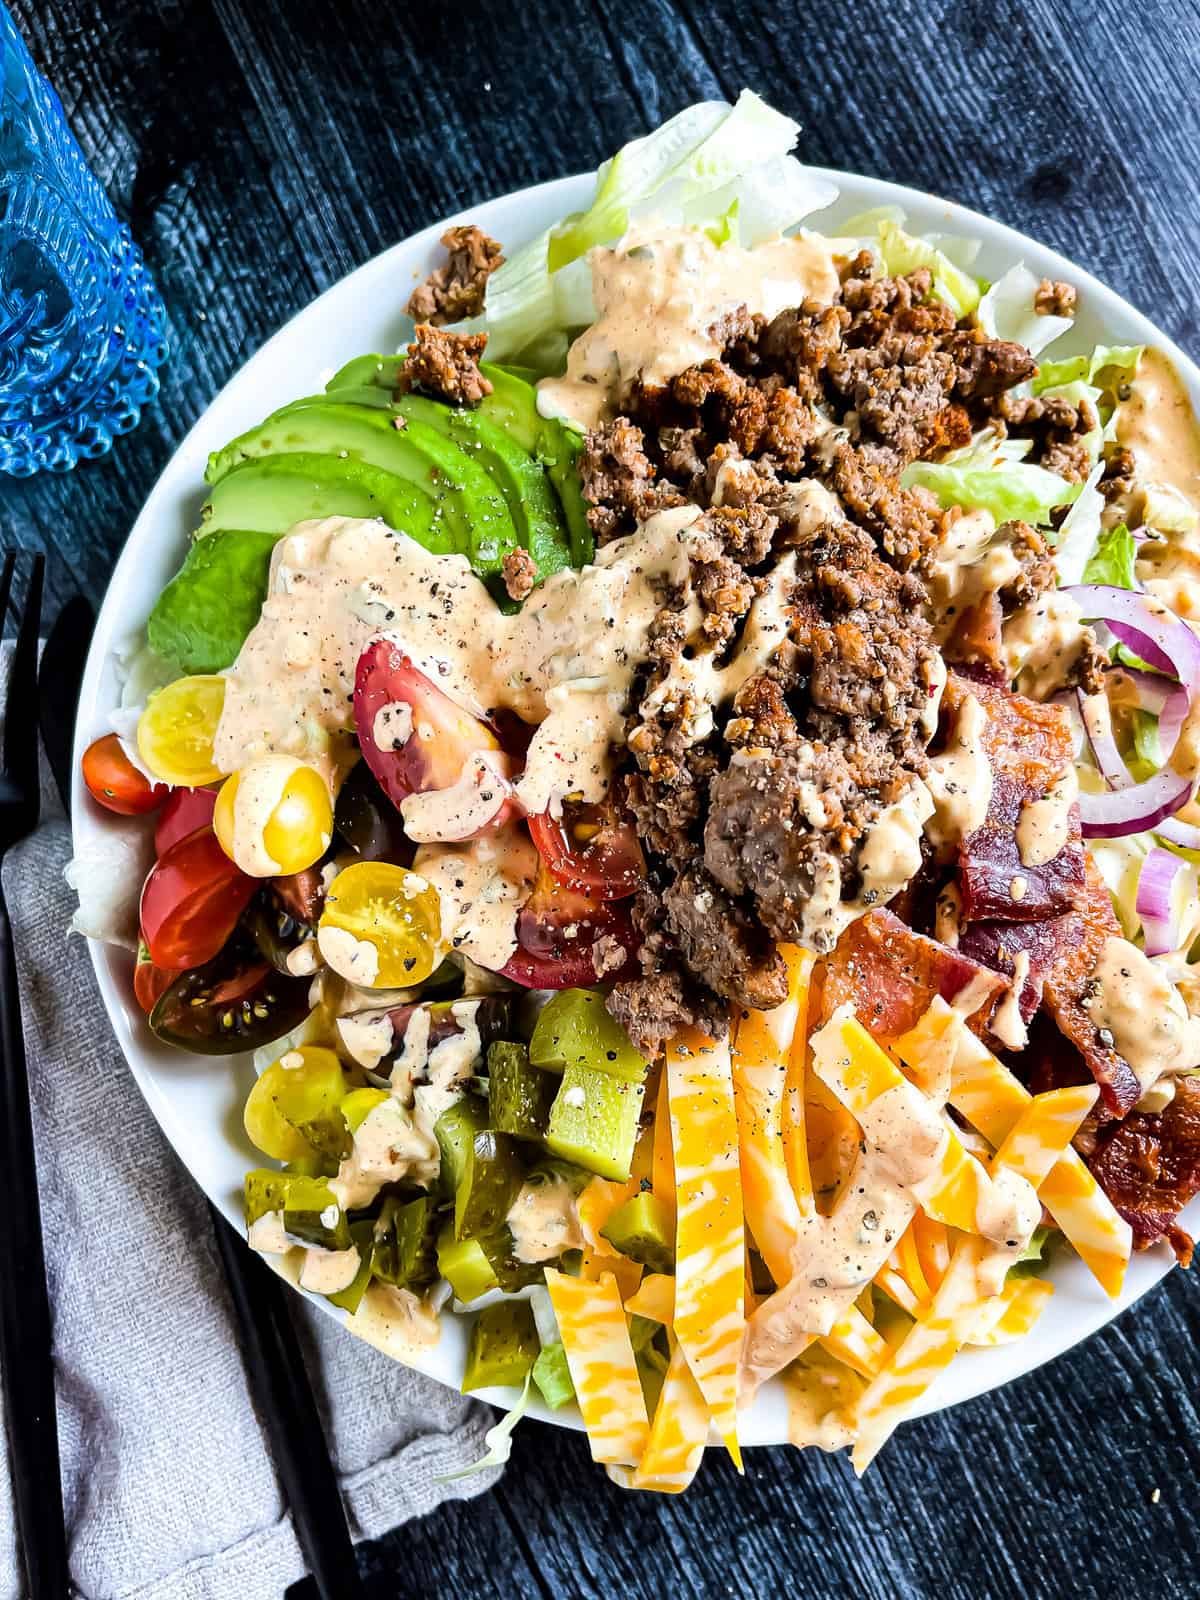 burger bowl with veggies, cheese, beef, and special sauce